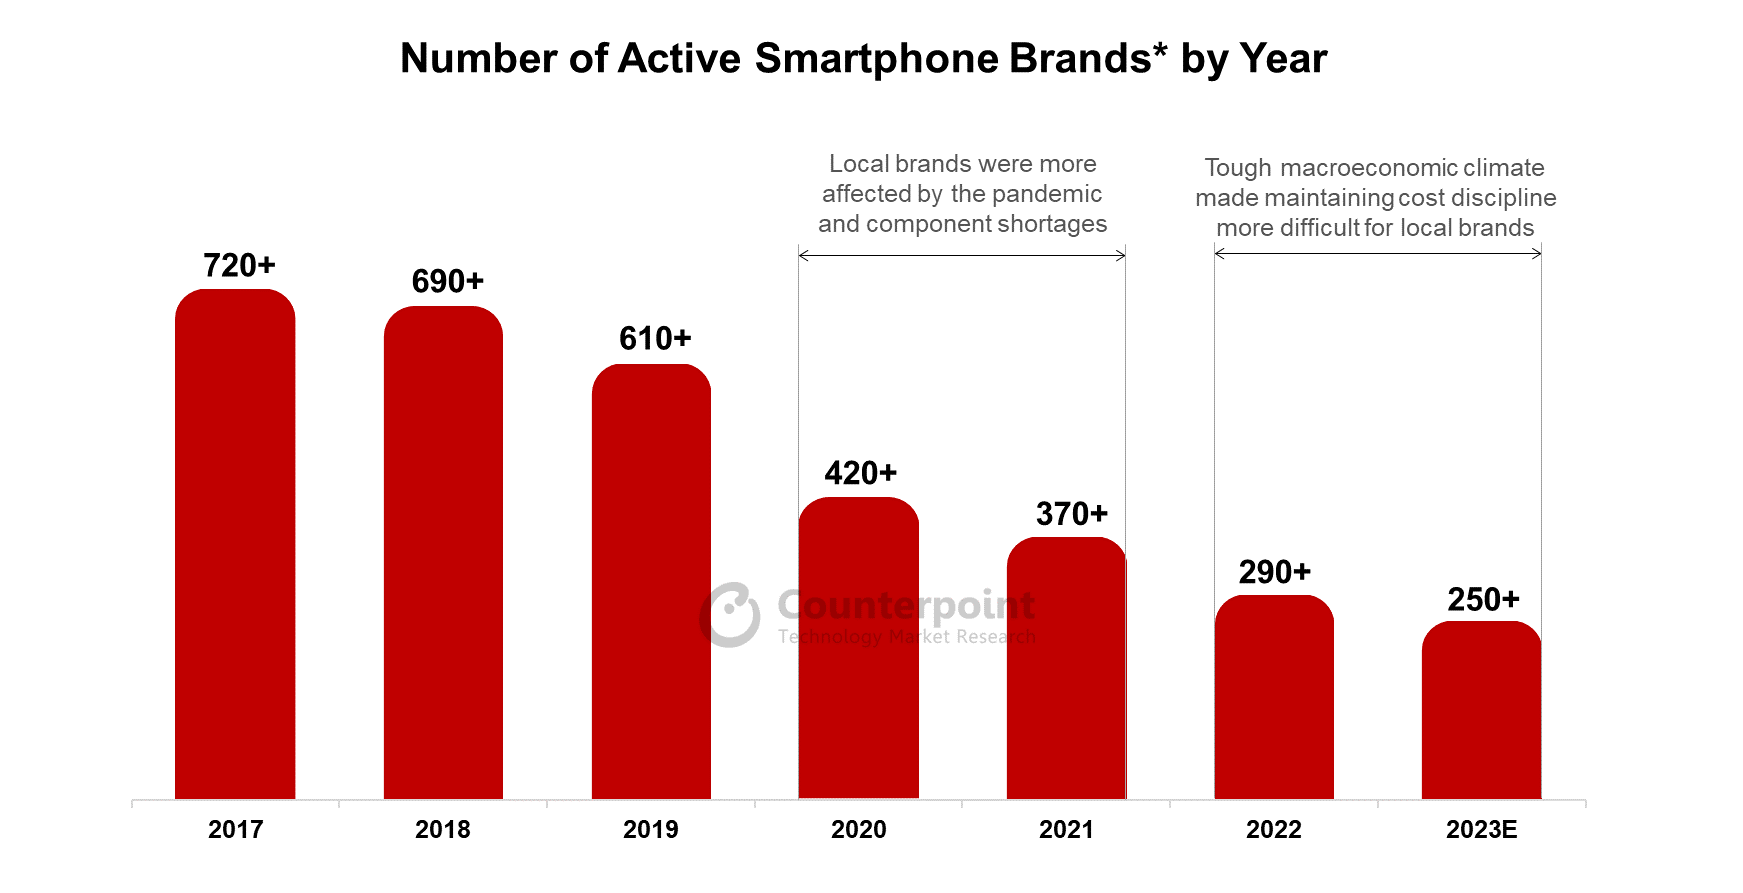 Number of Active Smartphone Brands by Year